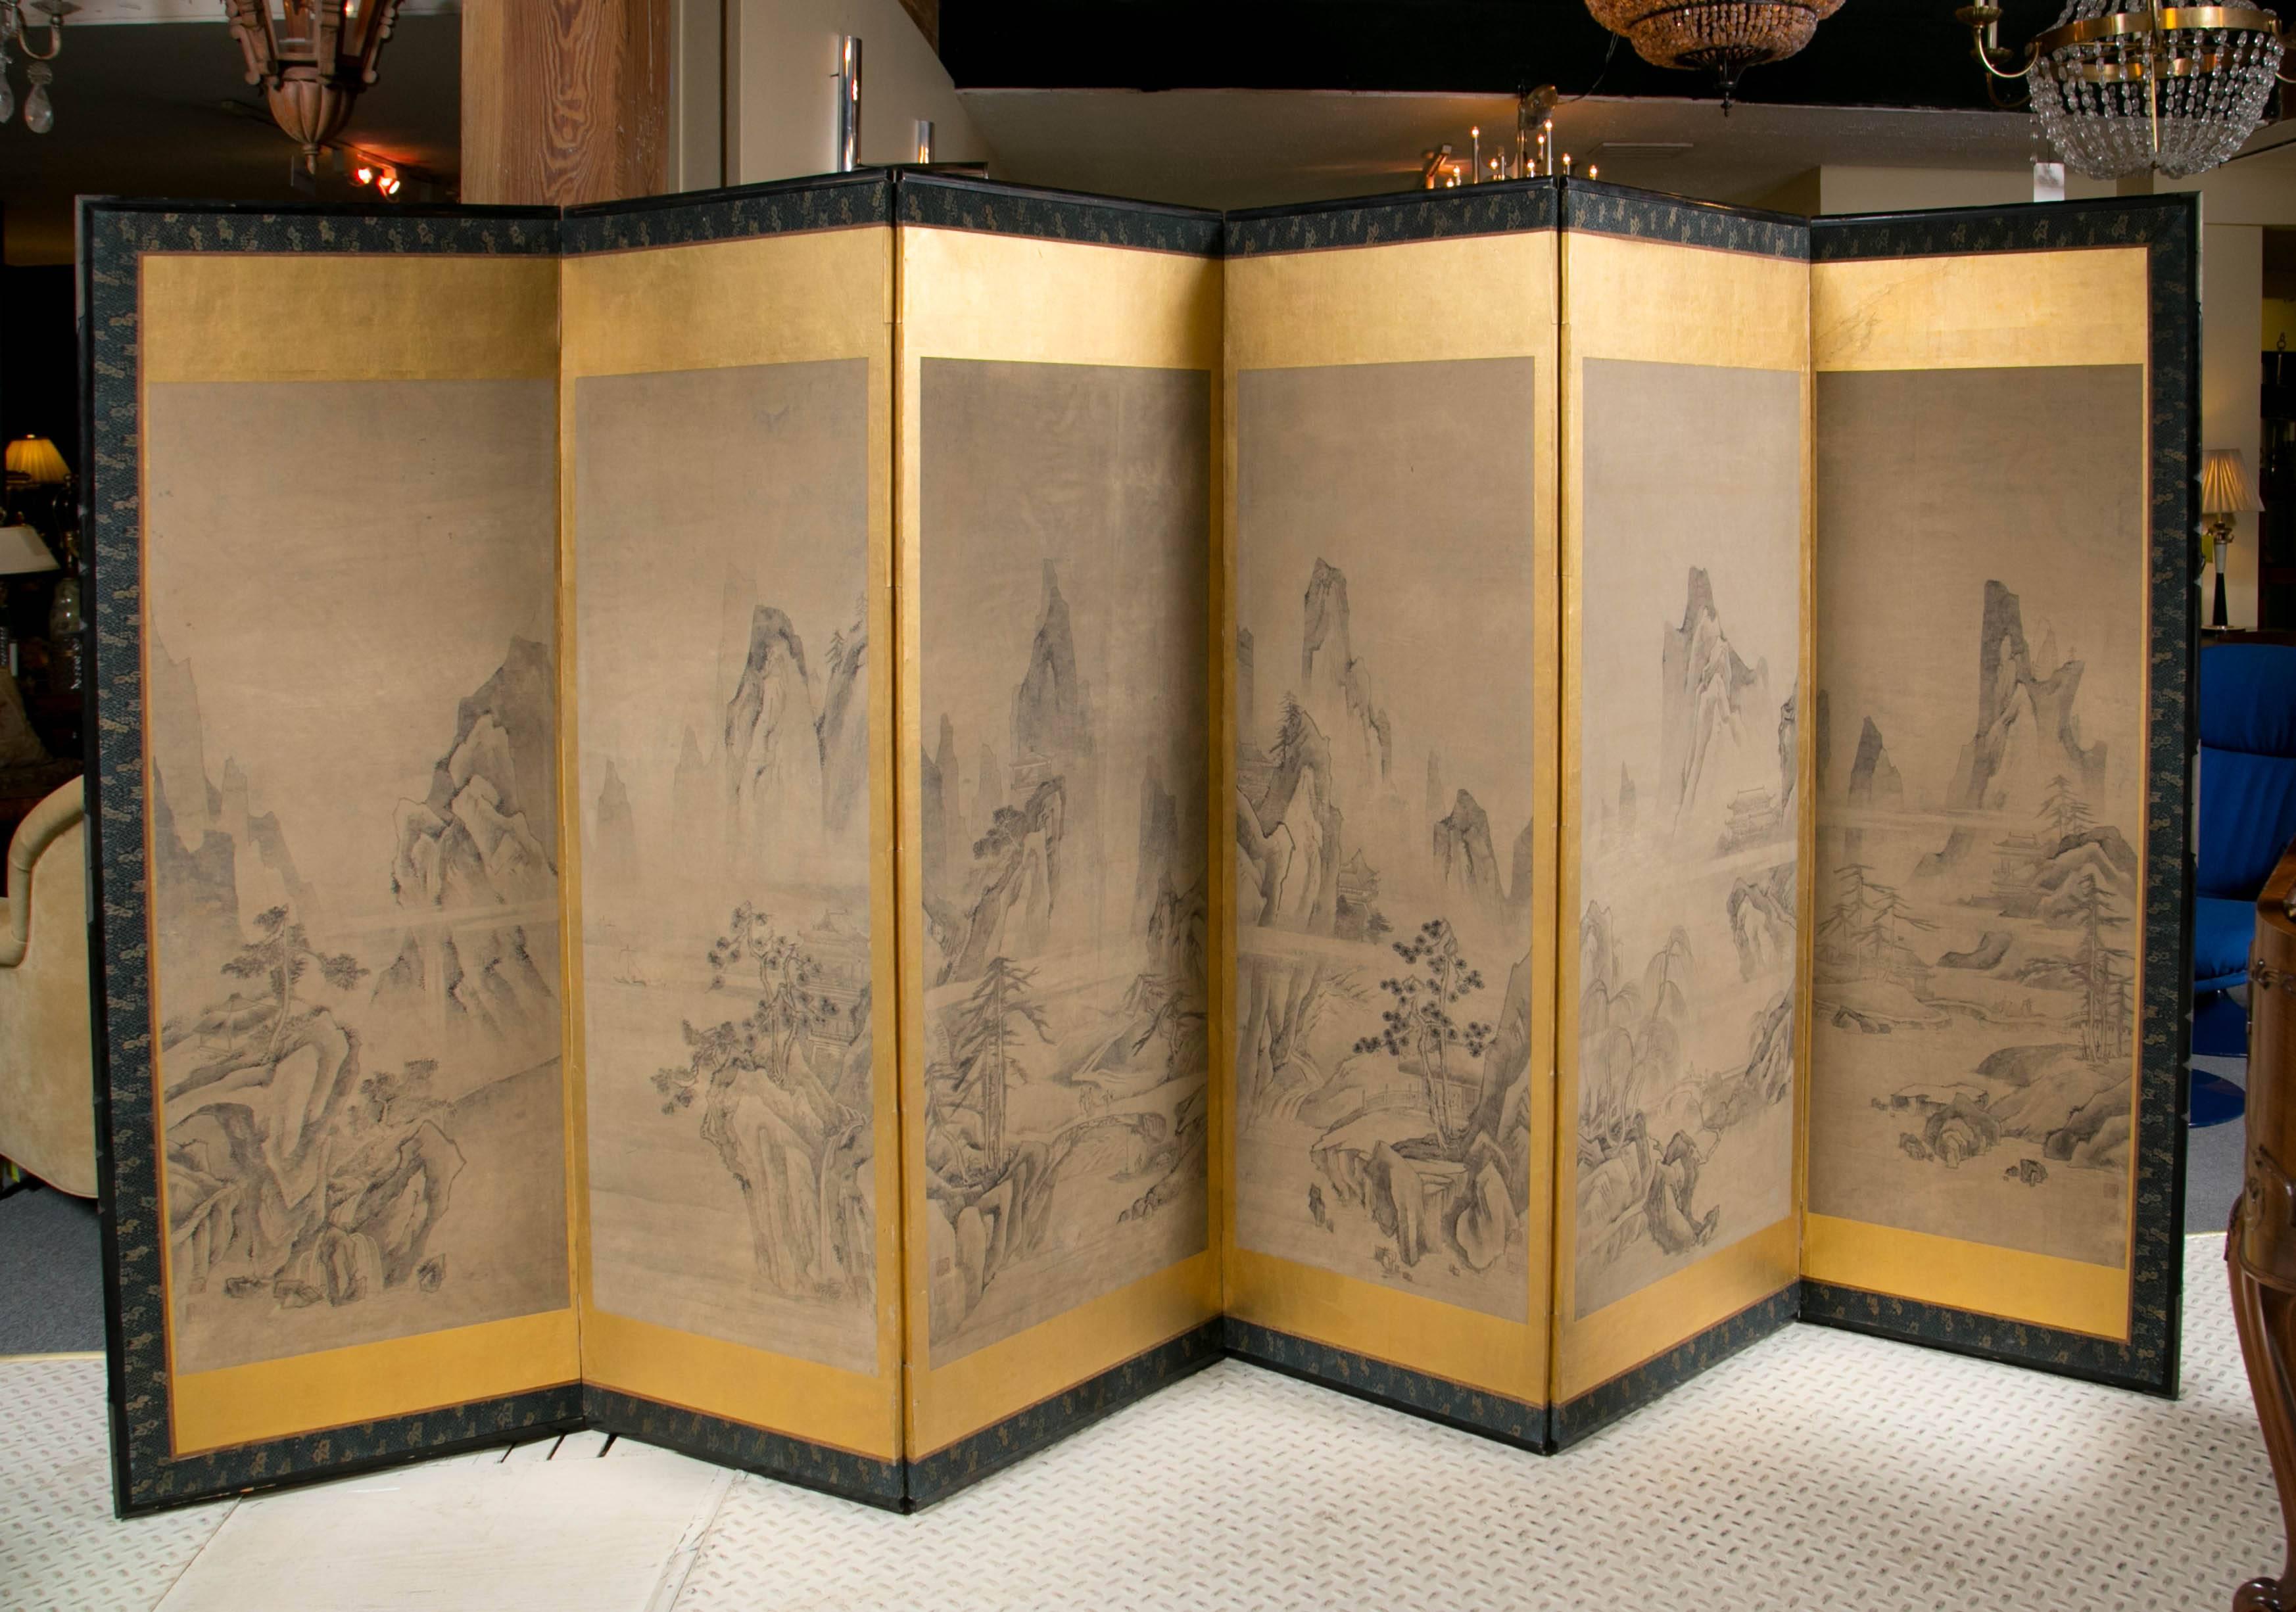 Late 19th Century Japanese folding screen, ink on paper depicting a mountain scape.
Mounted on gold leaf with silk brocade border.